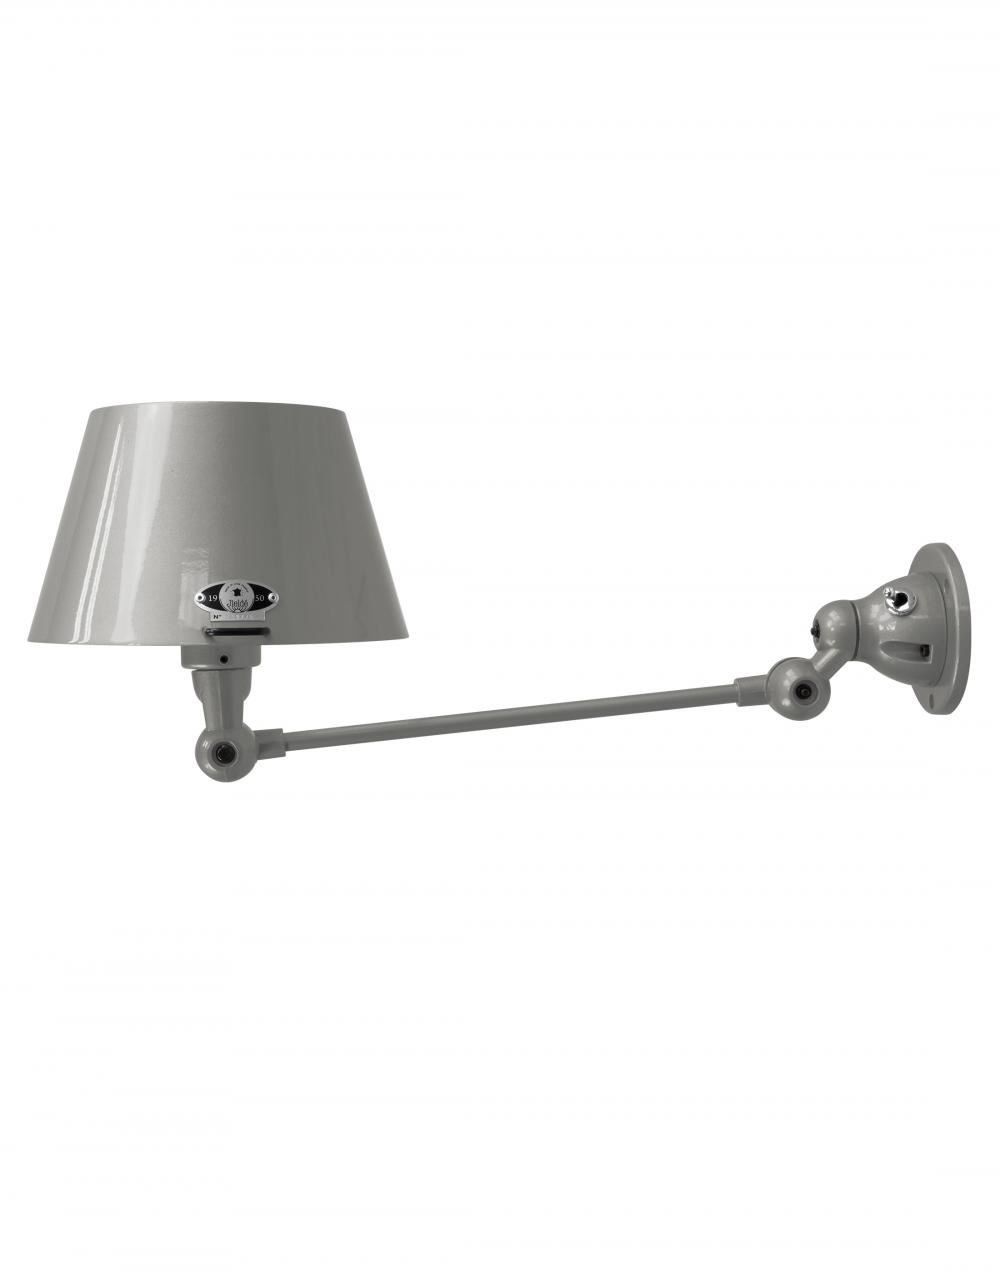 Jielde Aicler One Arm Adjustable Wall Light Straight Shade Mouse Grey Matt Integral Switch On Wall Base